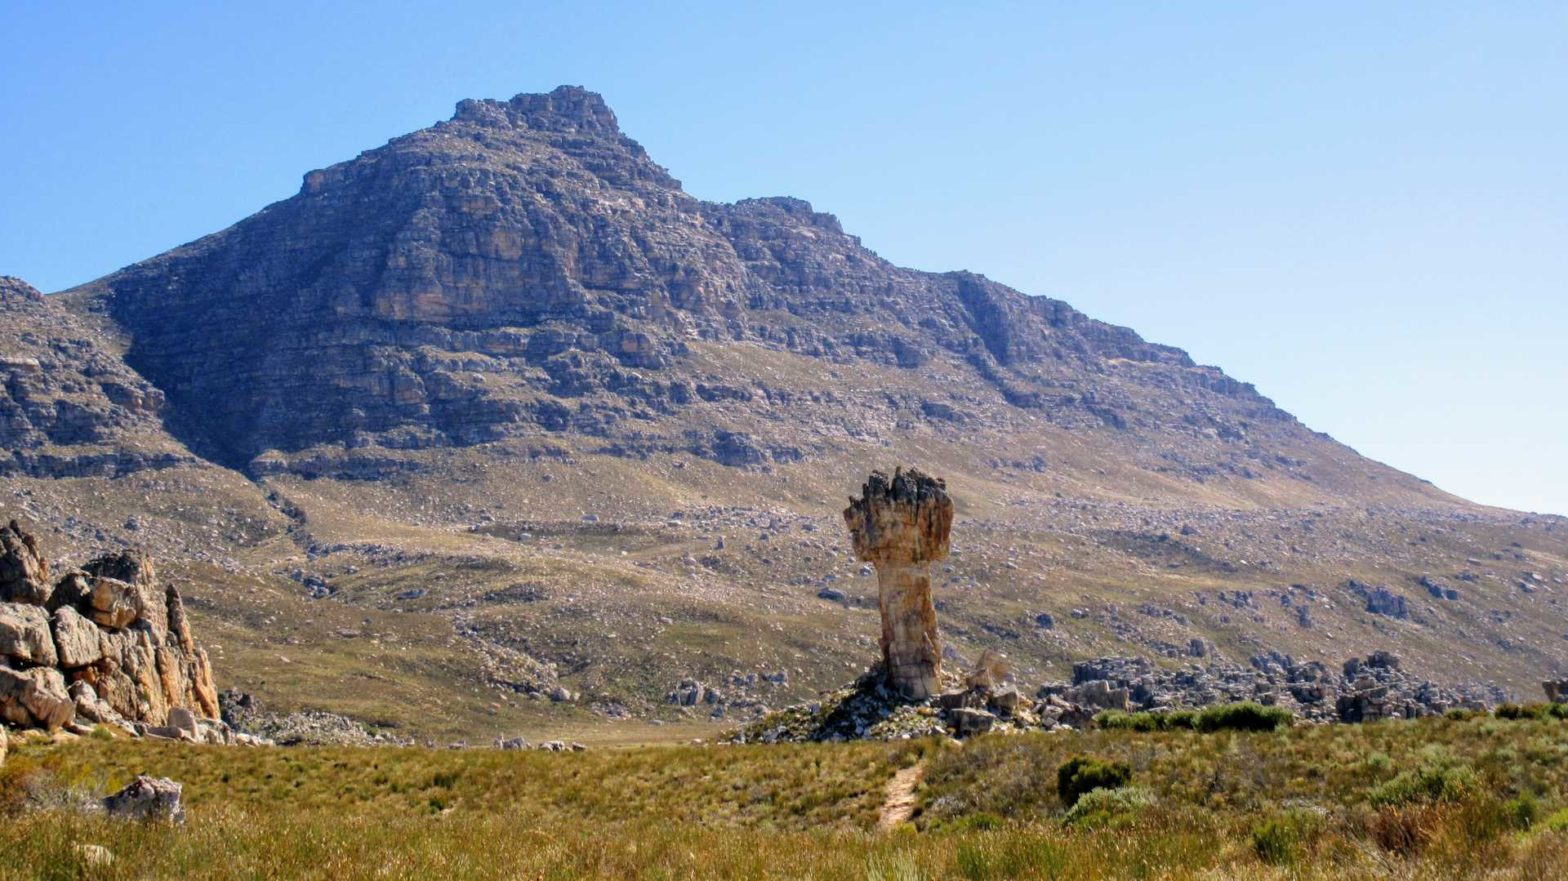 The Maltese Cross in the Cederberg Wilderness Area, South Africa.